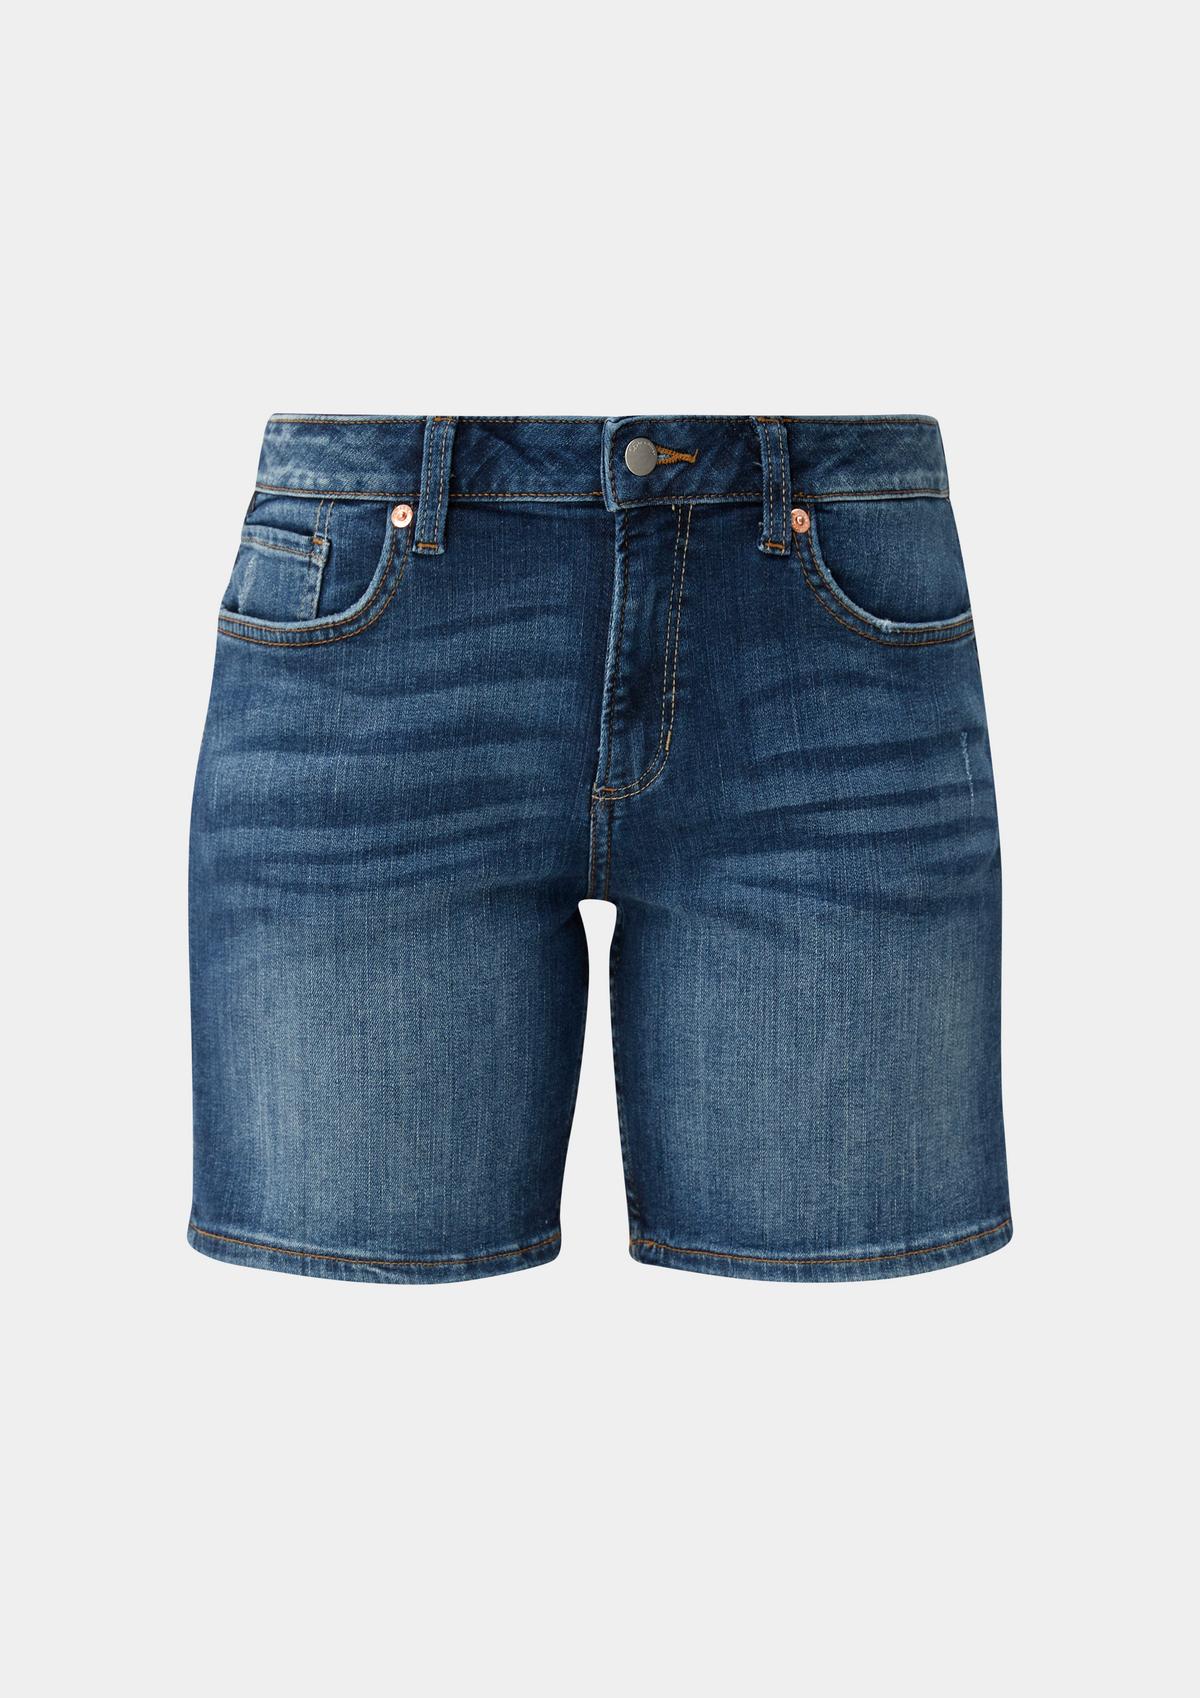 s.Oliver Jeans-Shorts Abby / Slim Fit / Mid Rise / Slim Leg